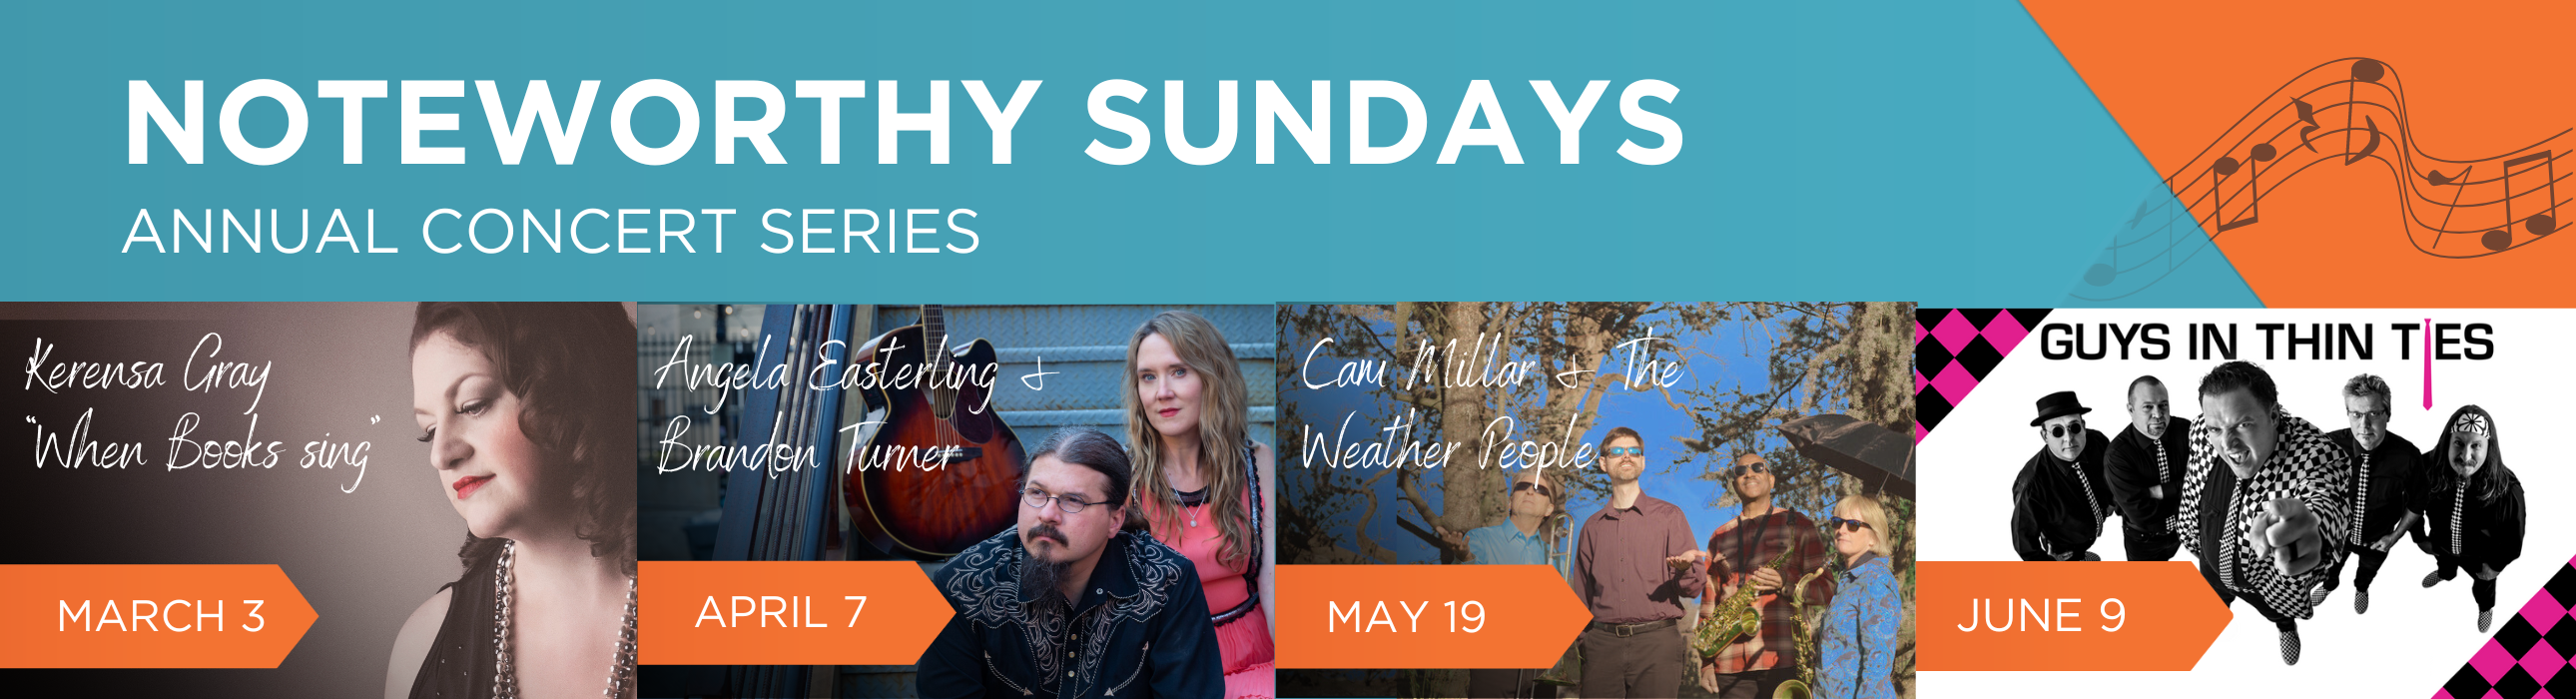 "Noteworthy Sundays" text with 4 images of musicians posing for photos.